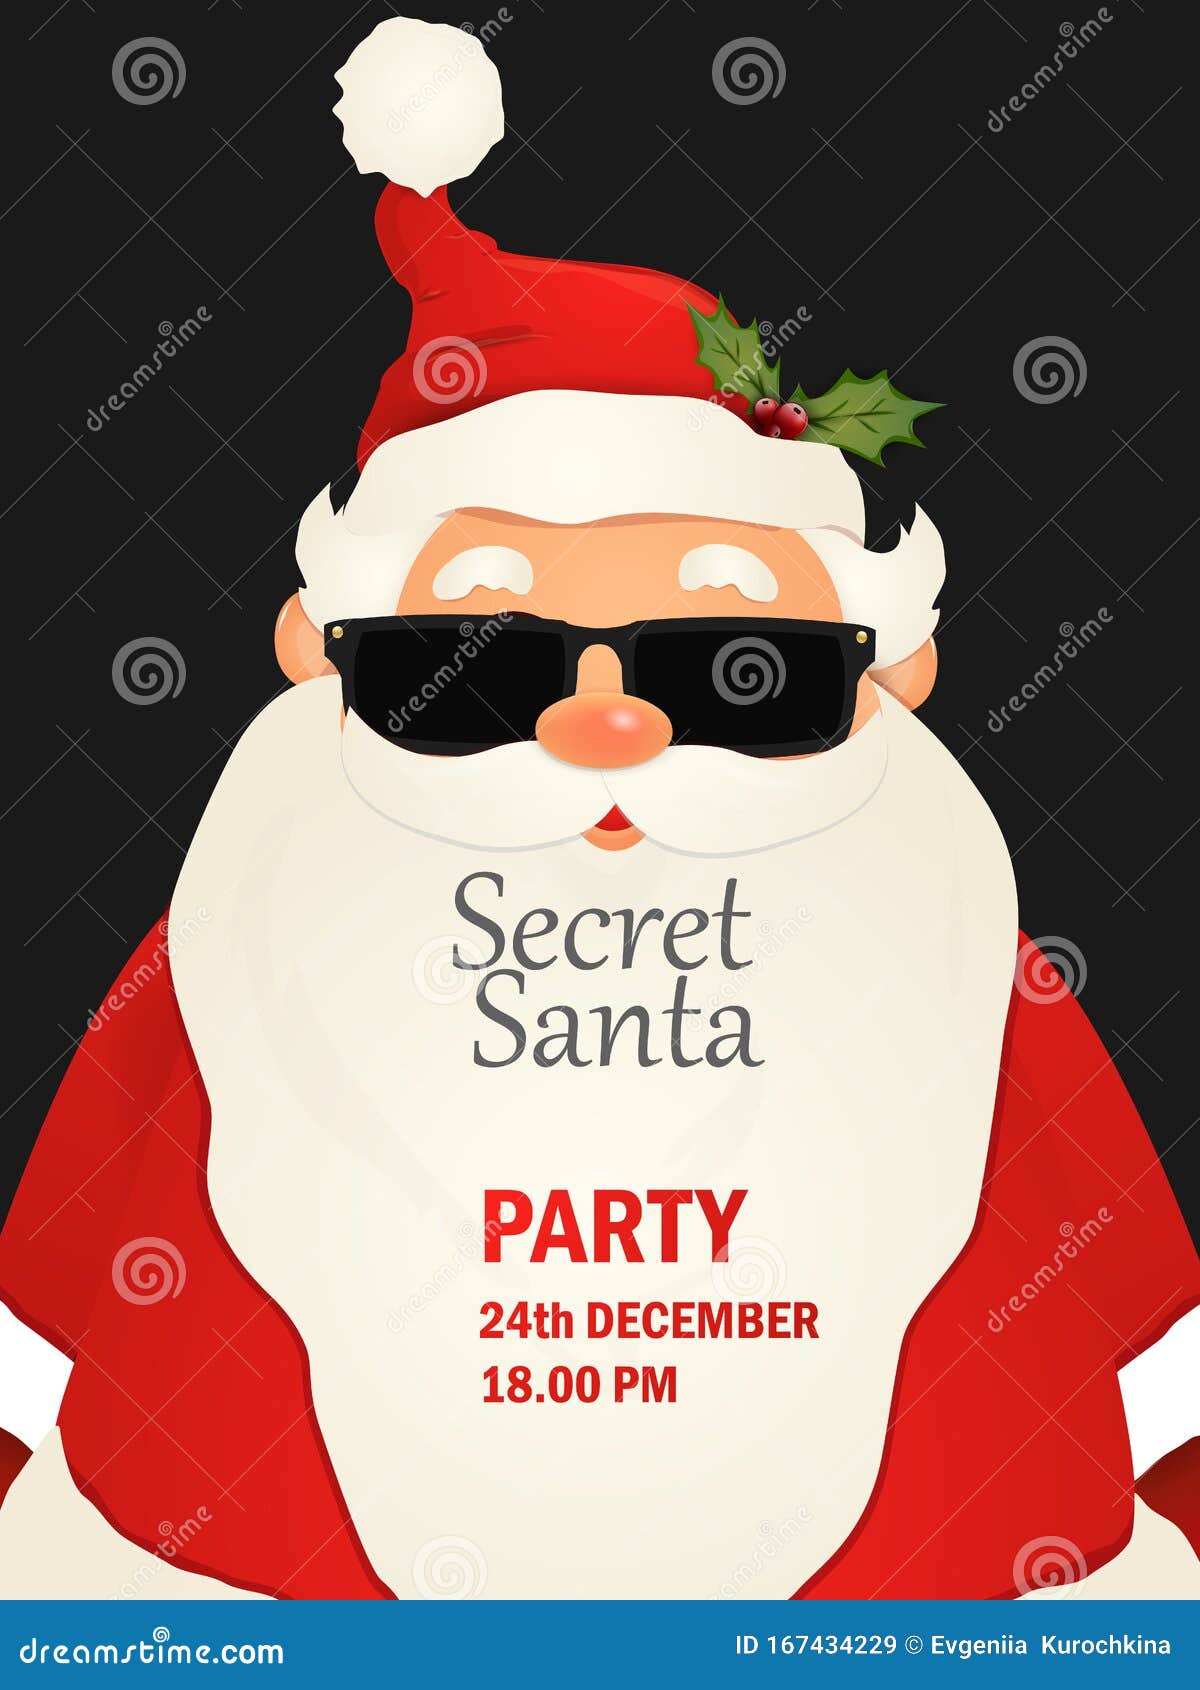 Cartoon Secret Santa Christmas Party Background Template with Santa Claus  and Black Glasses. Santa Clause for Winter and New Year Stock Illustration  - Illustration of icon, head: 167434229